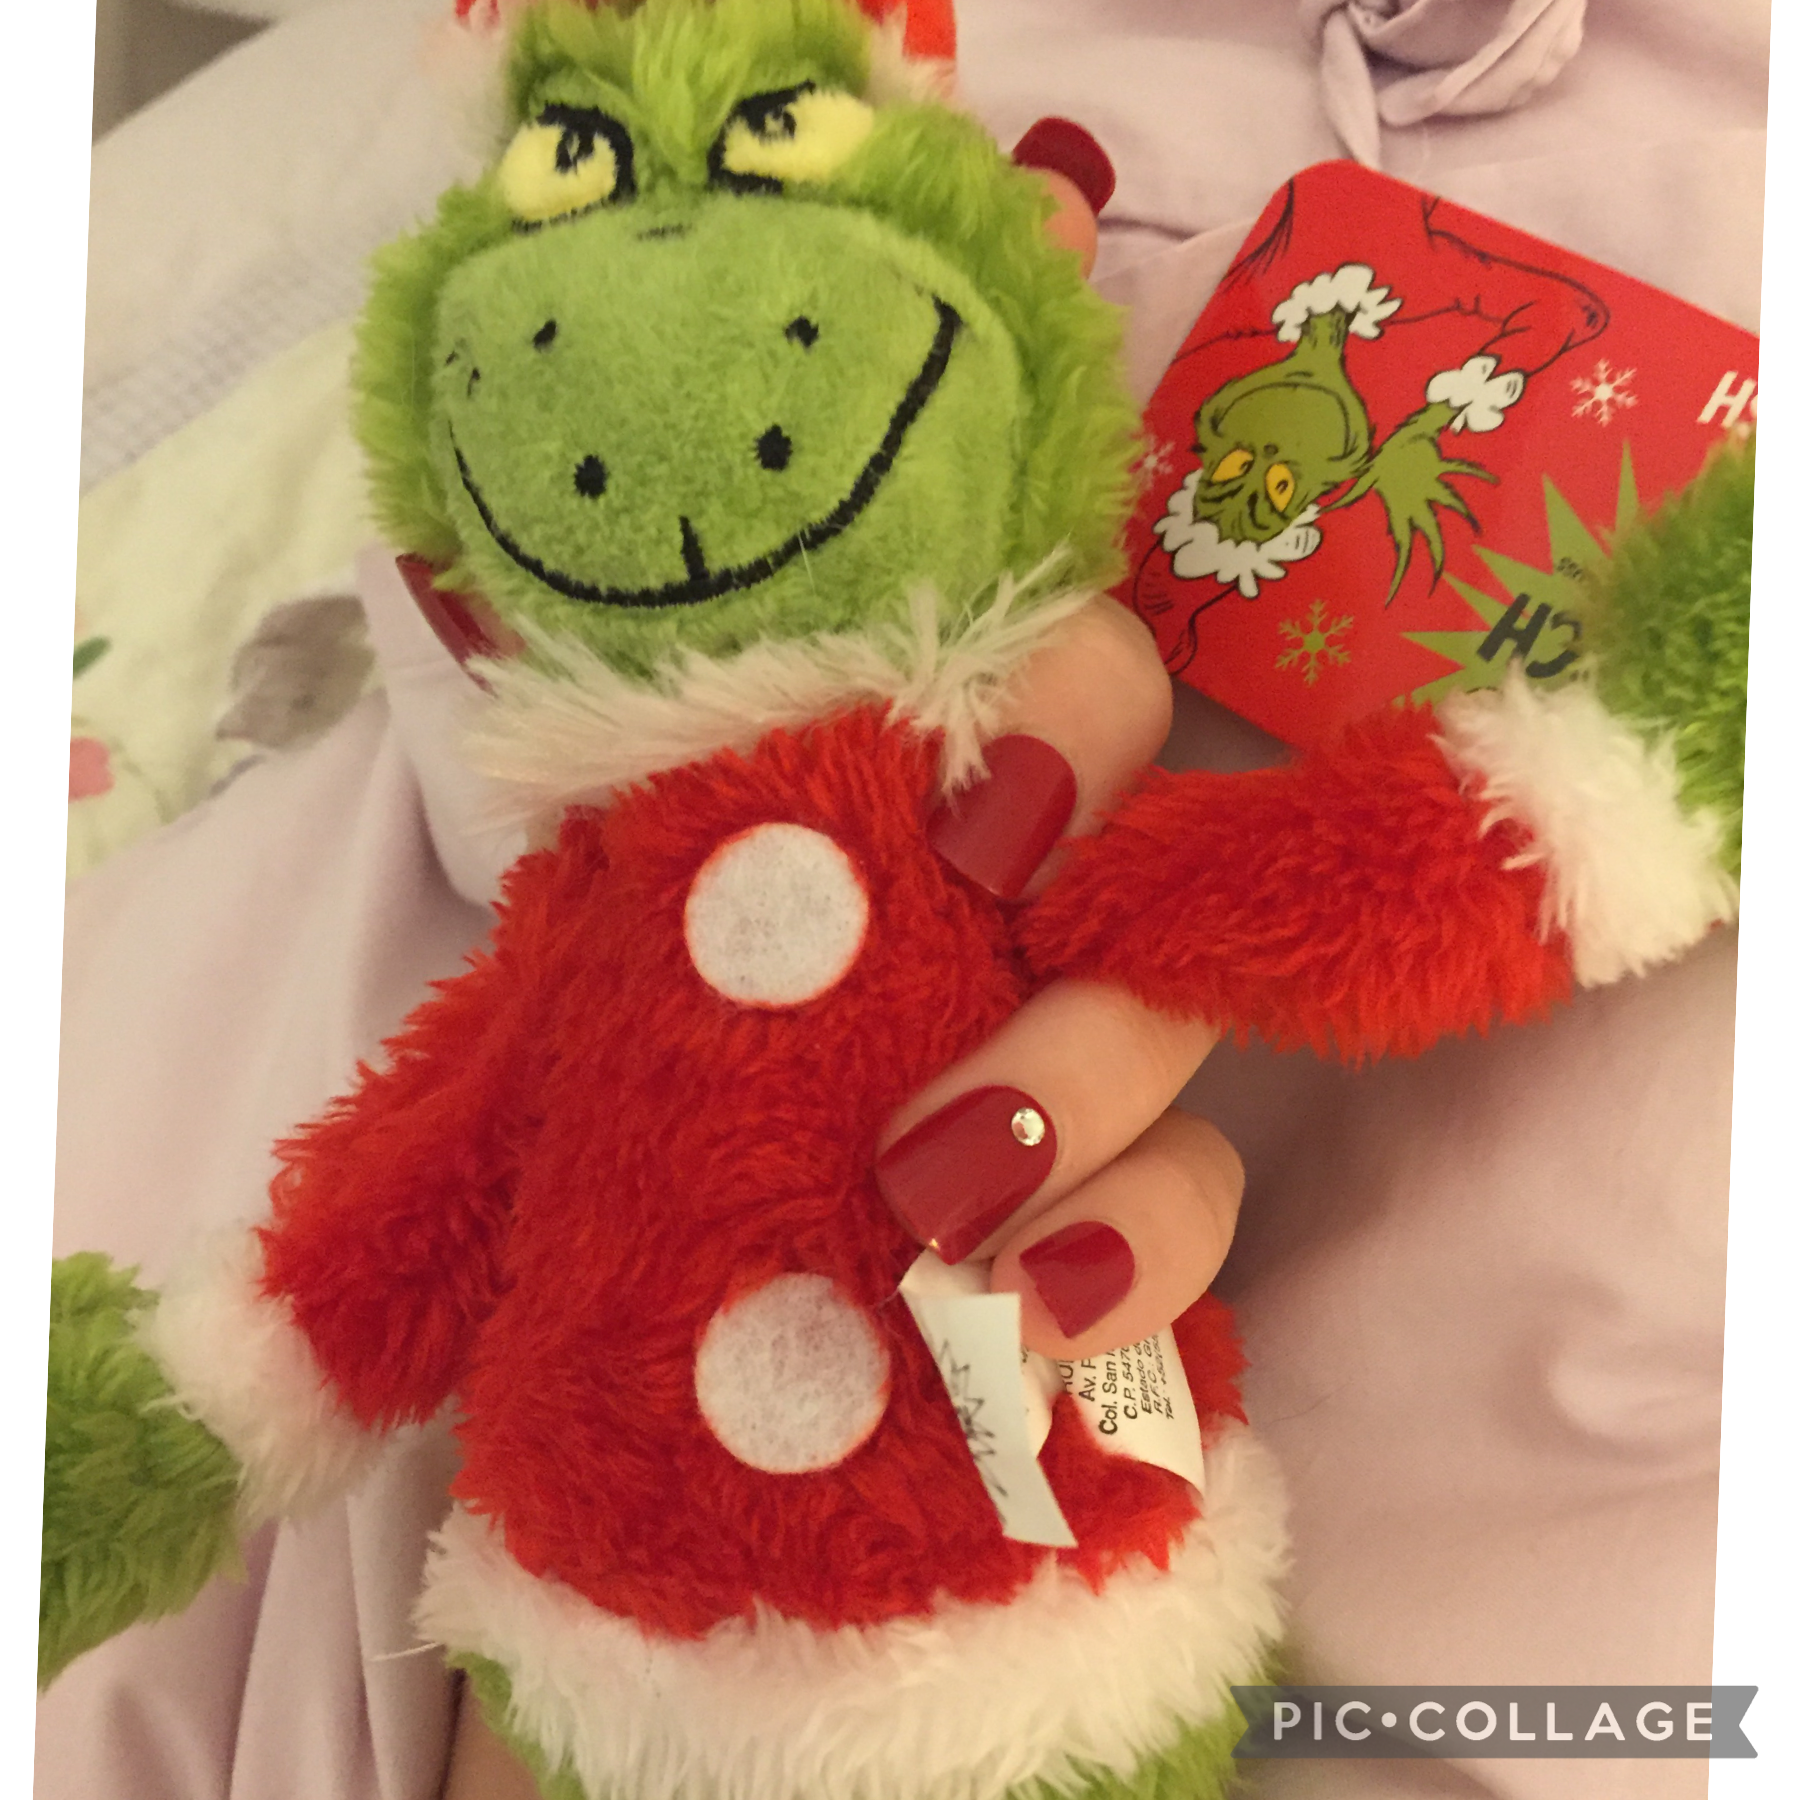 Picked out this adorbs stuffed Grinch at my local CVS for my baby sis!